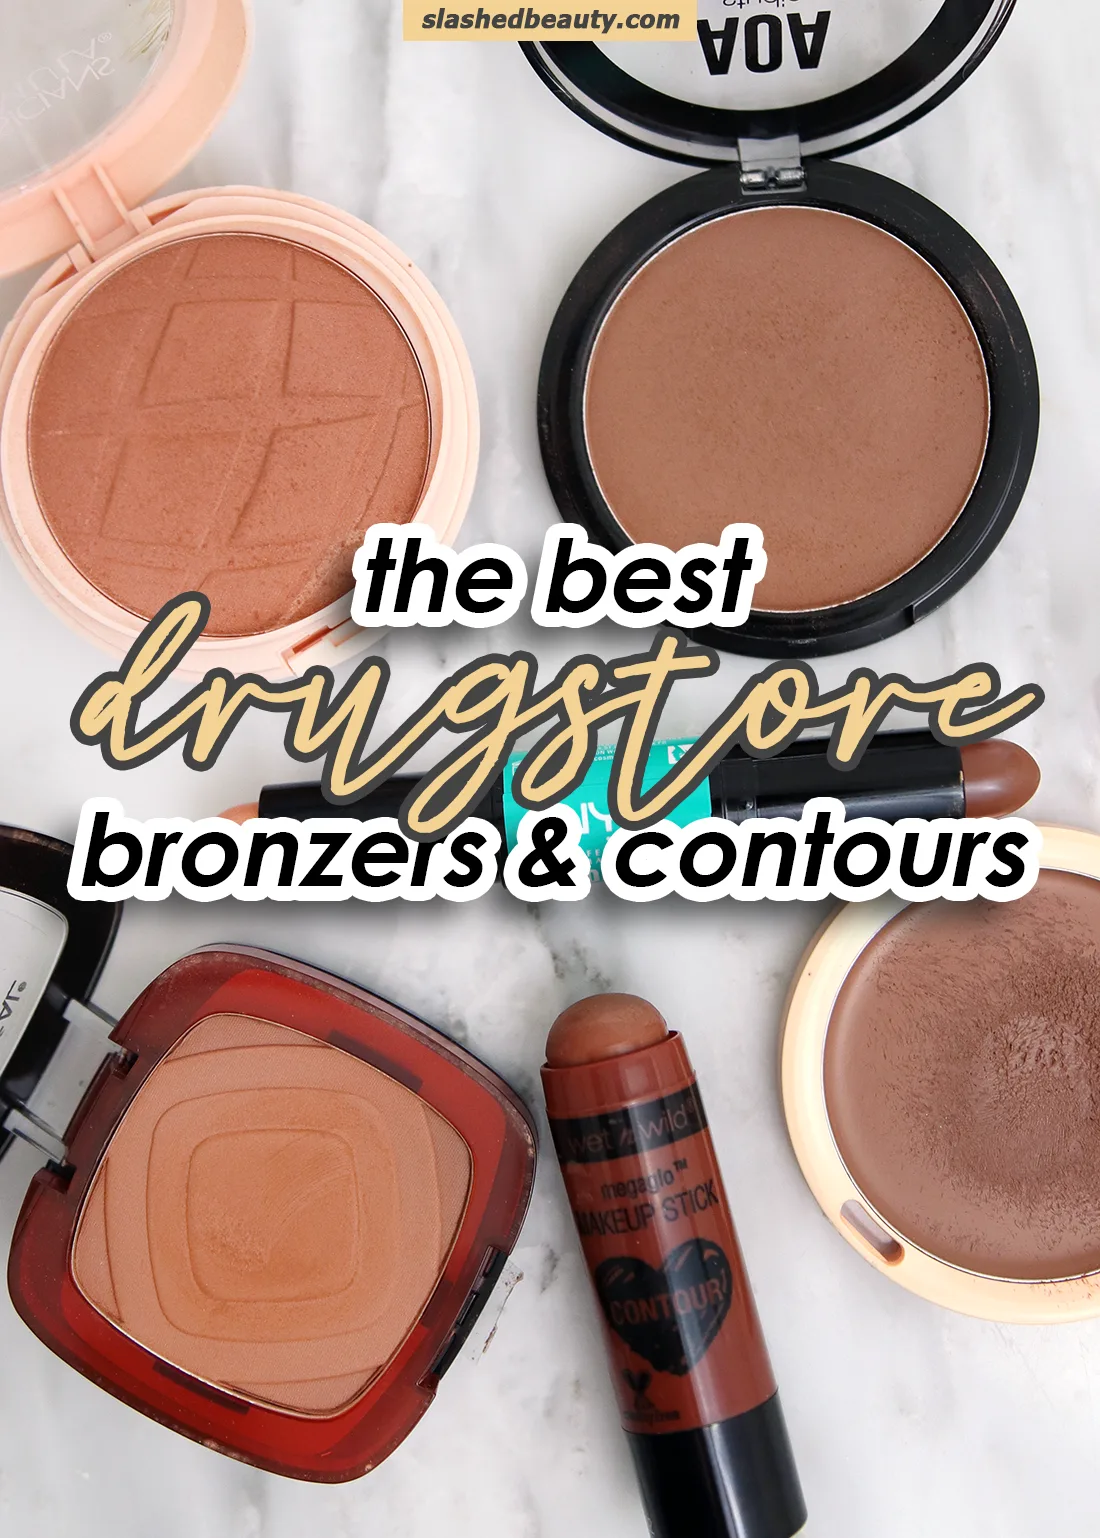 Collection of drugstore bronzers and contours lying open on a marble surface with text superimposed: The Best Drugstore Bronzers & Contours | Slashed Beauty